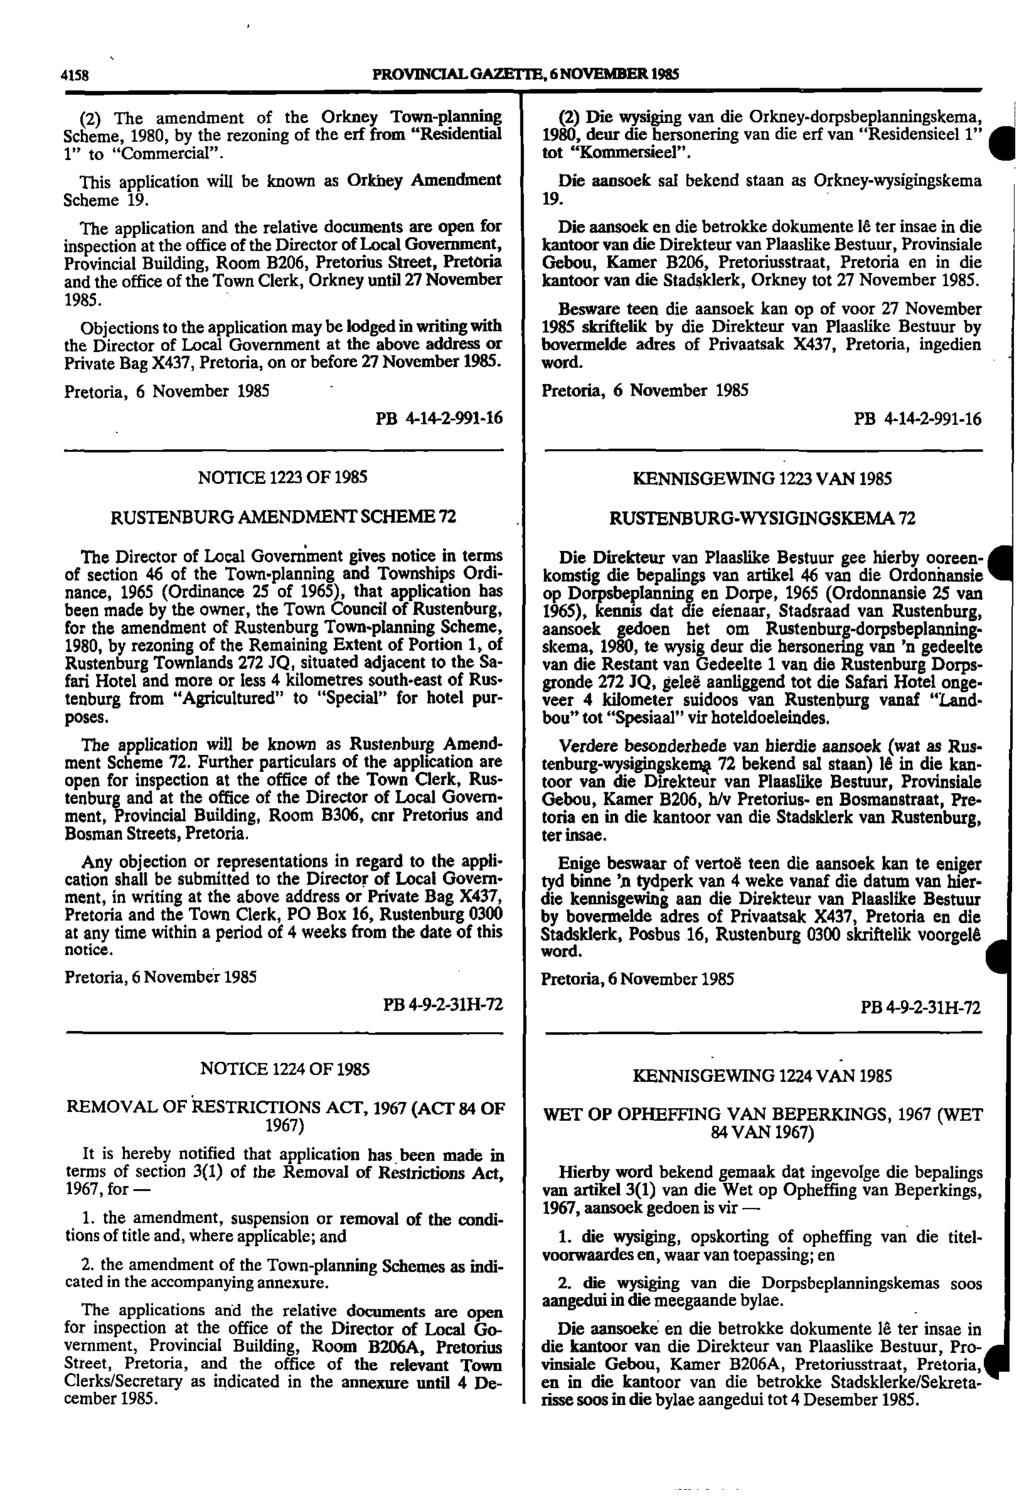 4158 PROVINCIAL GAZETIE, 6 NOVEMBER 1985 (2) The amendment of the Orkney Townplanning (2) Die wysiging van die Orkney dorpsbeplanningskema, Scheme, 1980, by the rezoning of the erf from "Residential